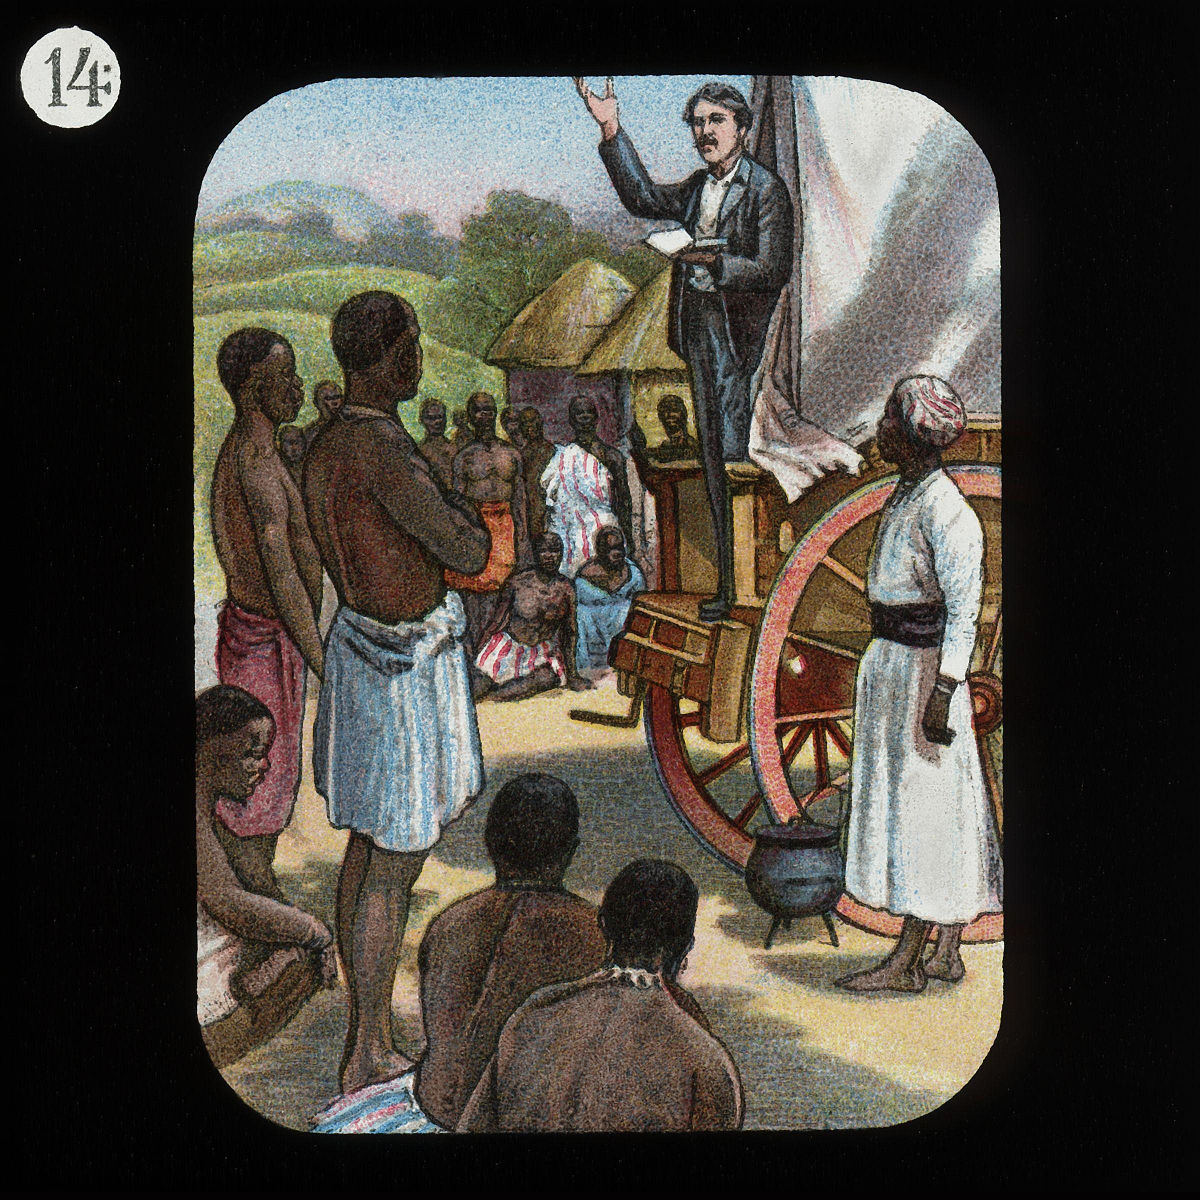 1200px-Preaching_from_a_Waggon_(David_Livingstone)_by_The_London_Missionary_Society.jpg